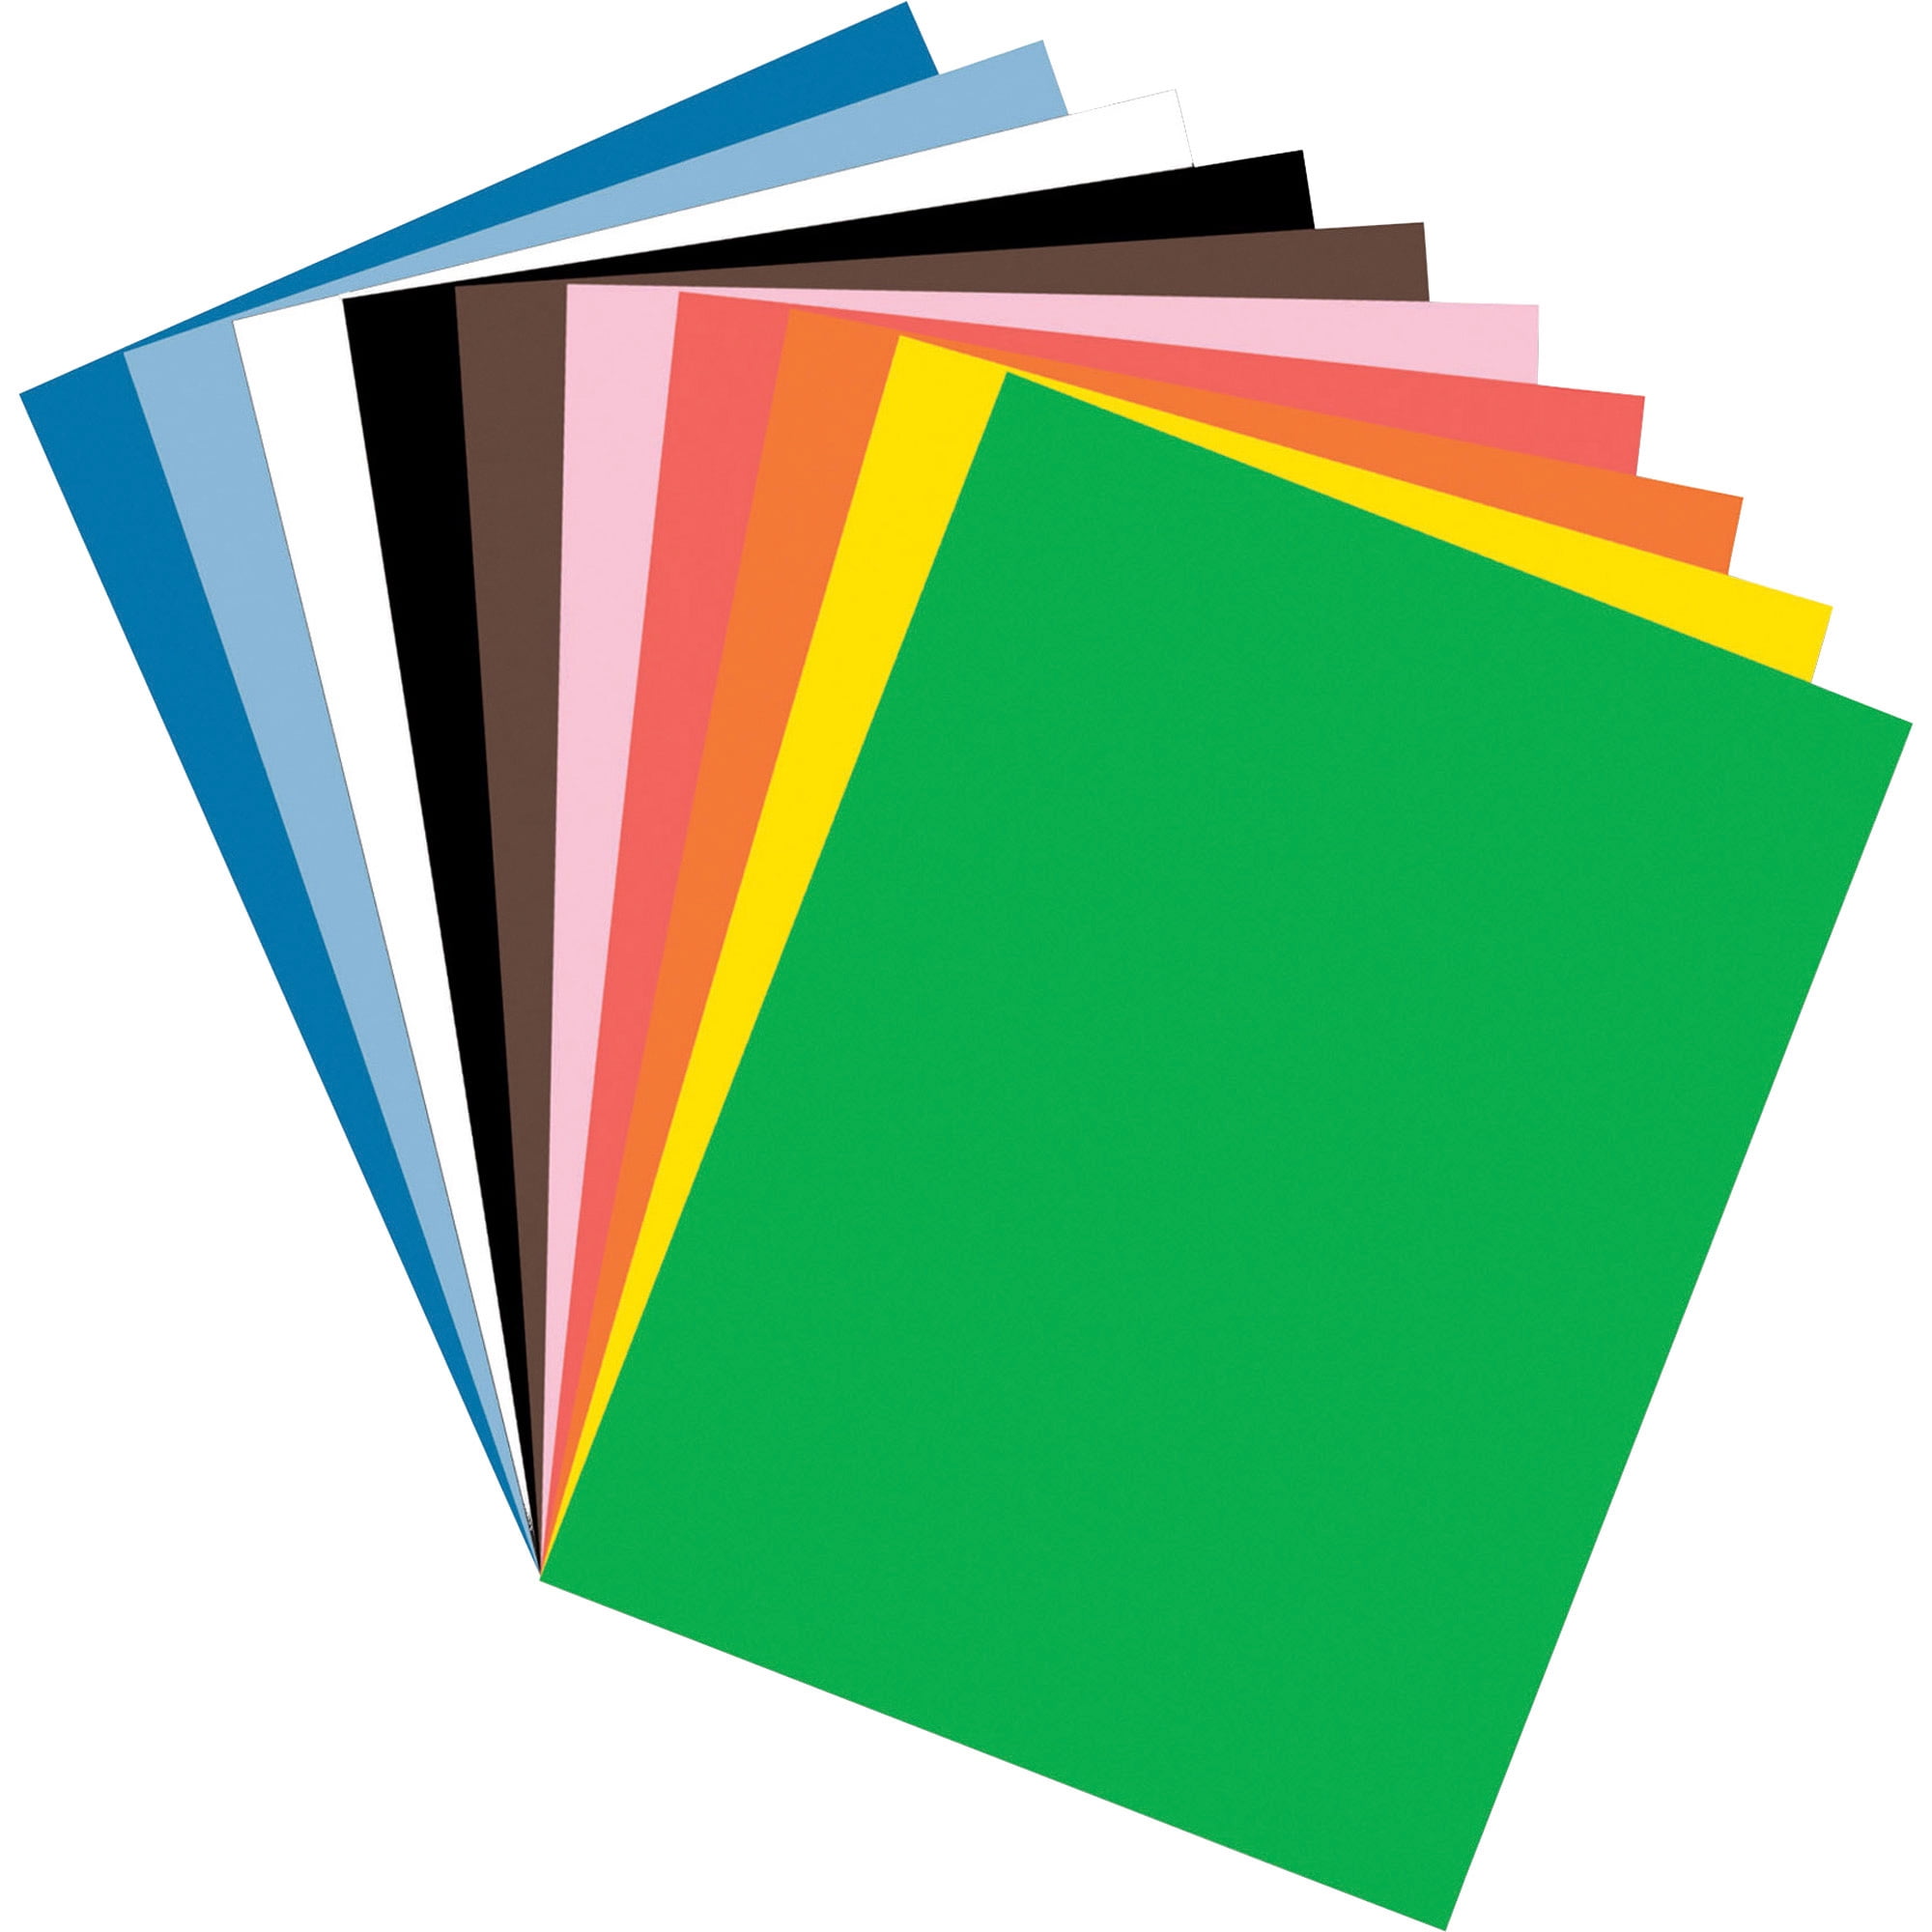 12 Packs: 50 ct. (600 total) 12 x 18 Construction Paper by Creatology®